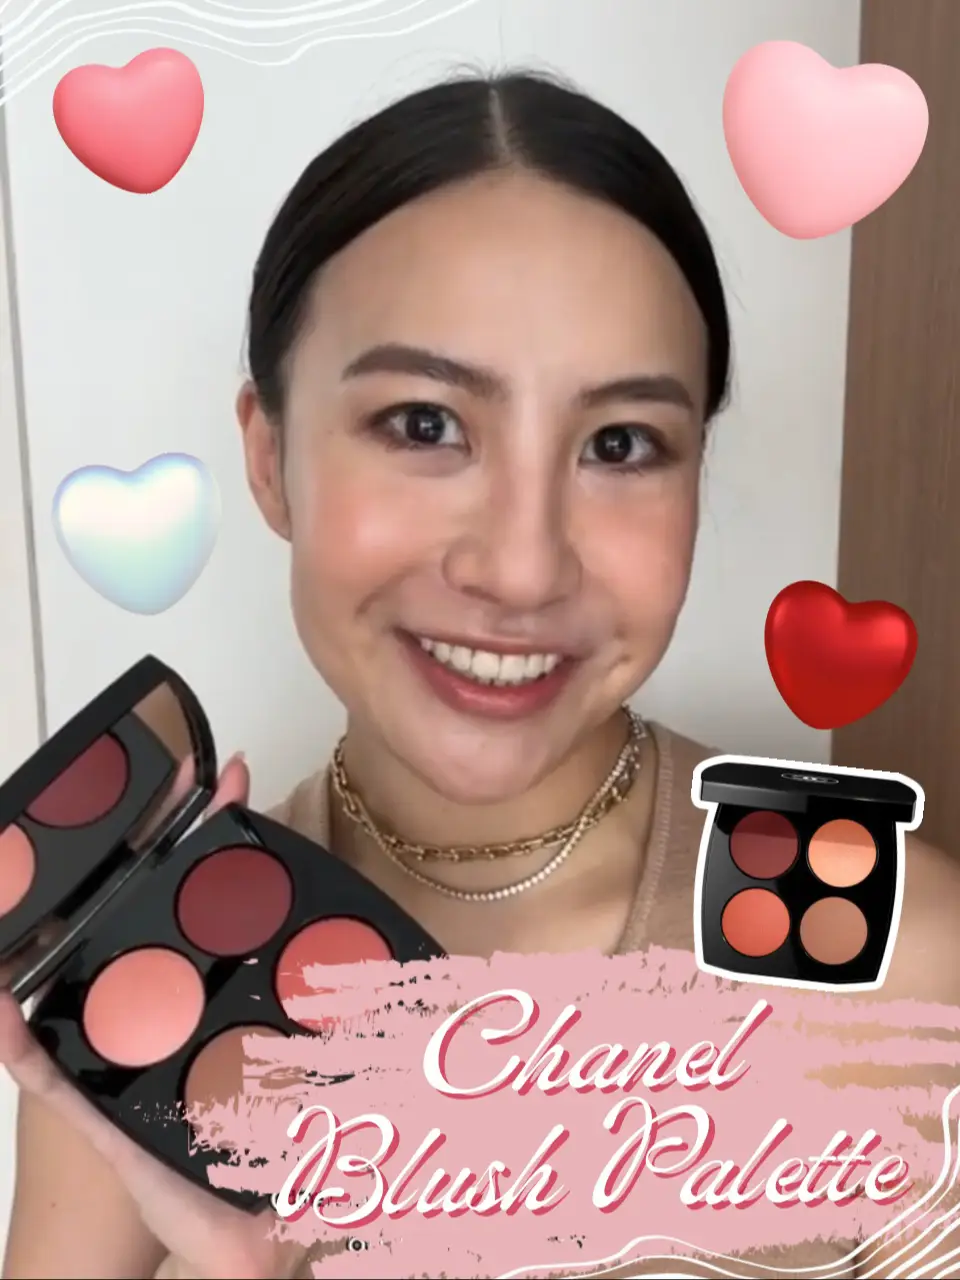 NEW CHANEL MAKEUP SPRING SUMMER 2023 EYESHADOW PALETTE DELICES  #chanelmakeup #chanel #chanelbeauty 